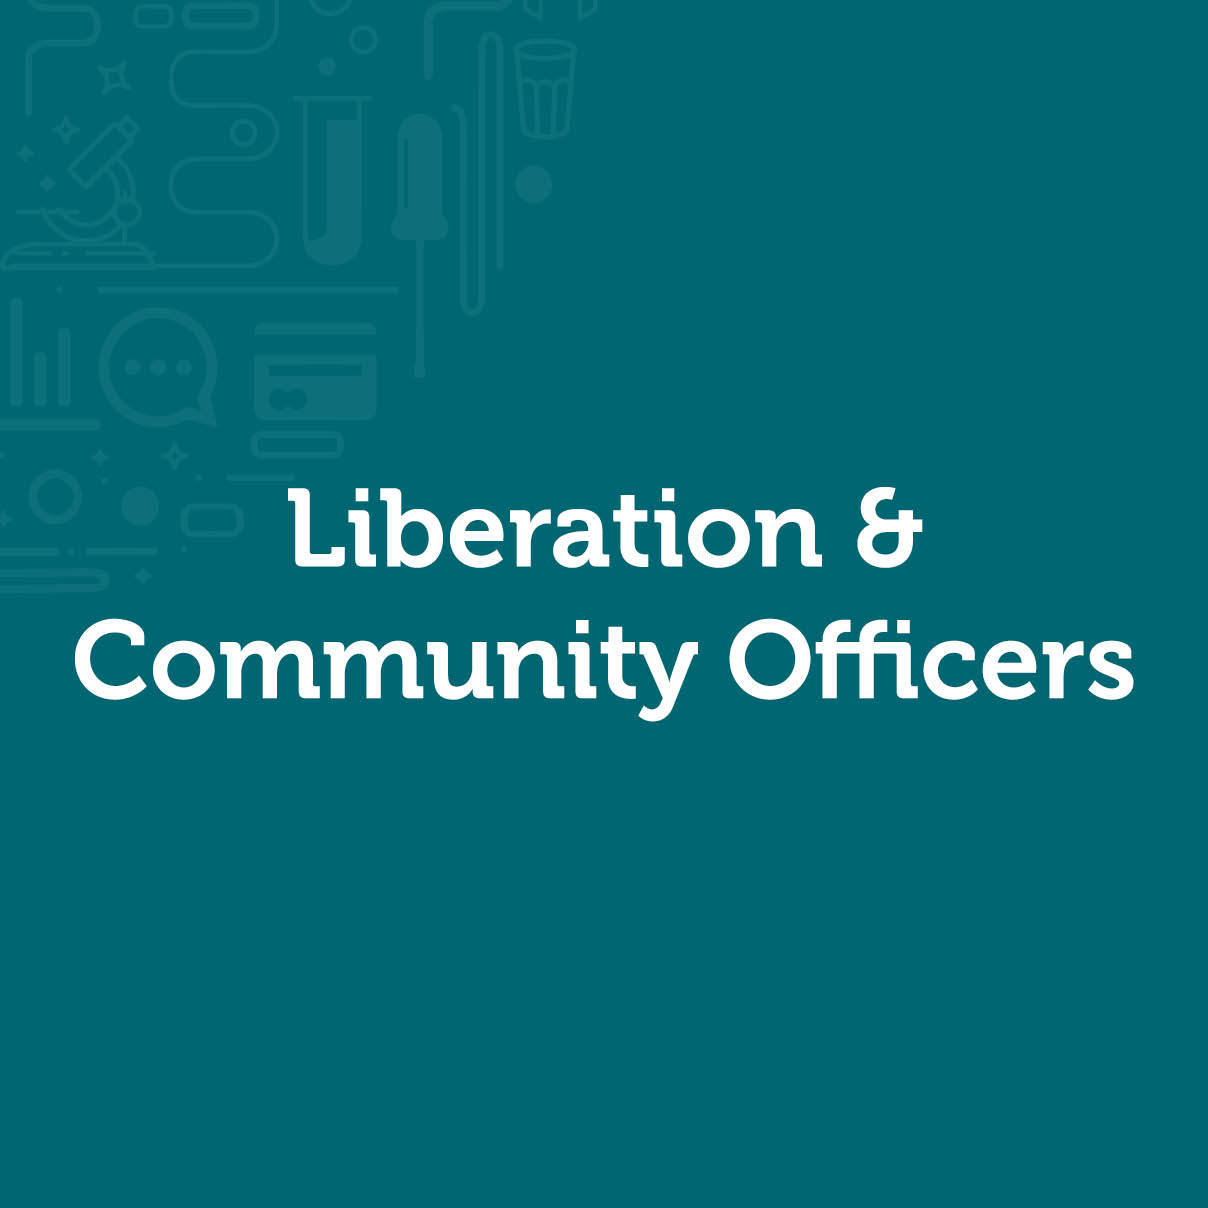 Liberation & Community Officers